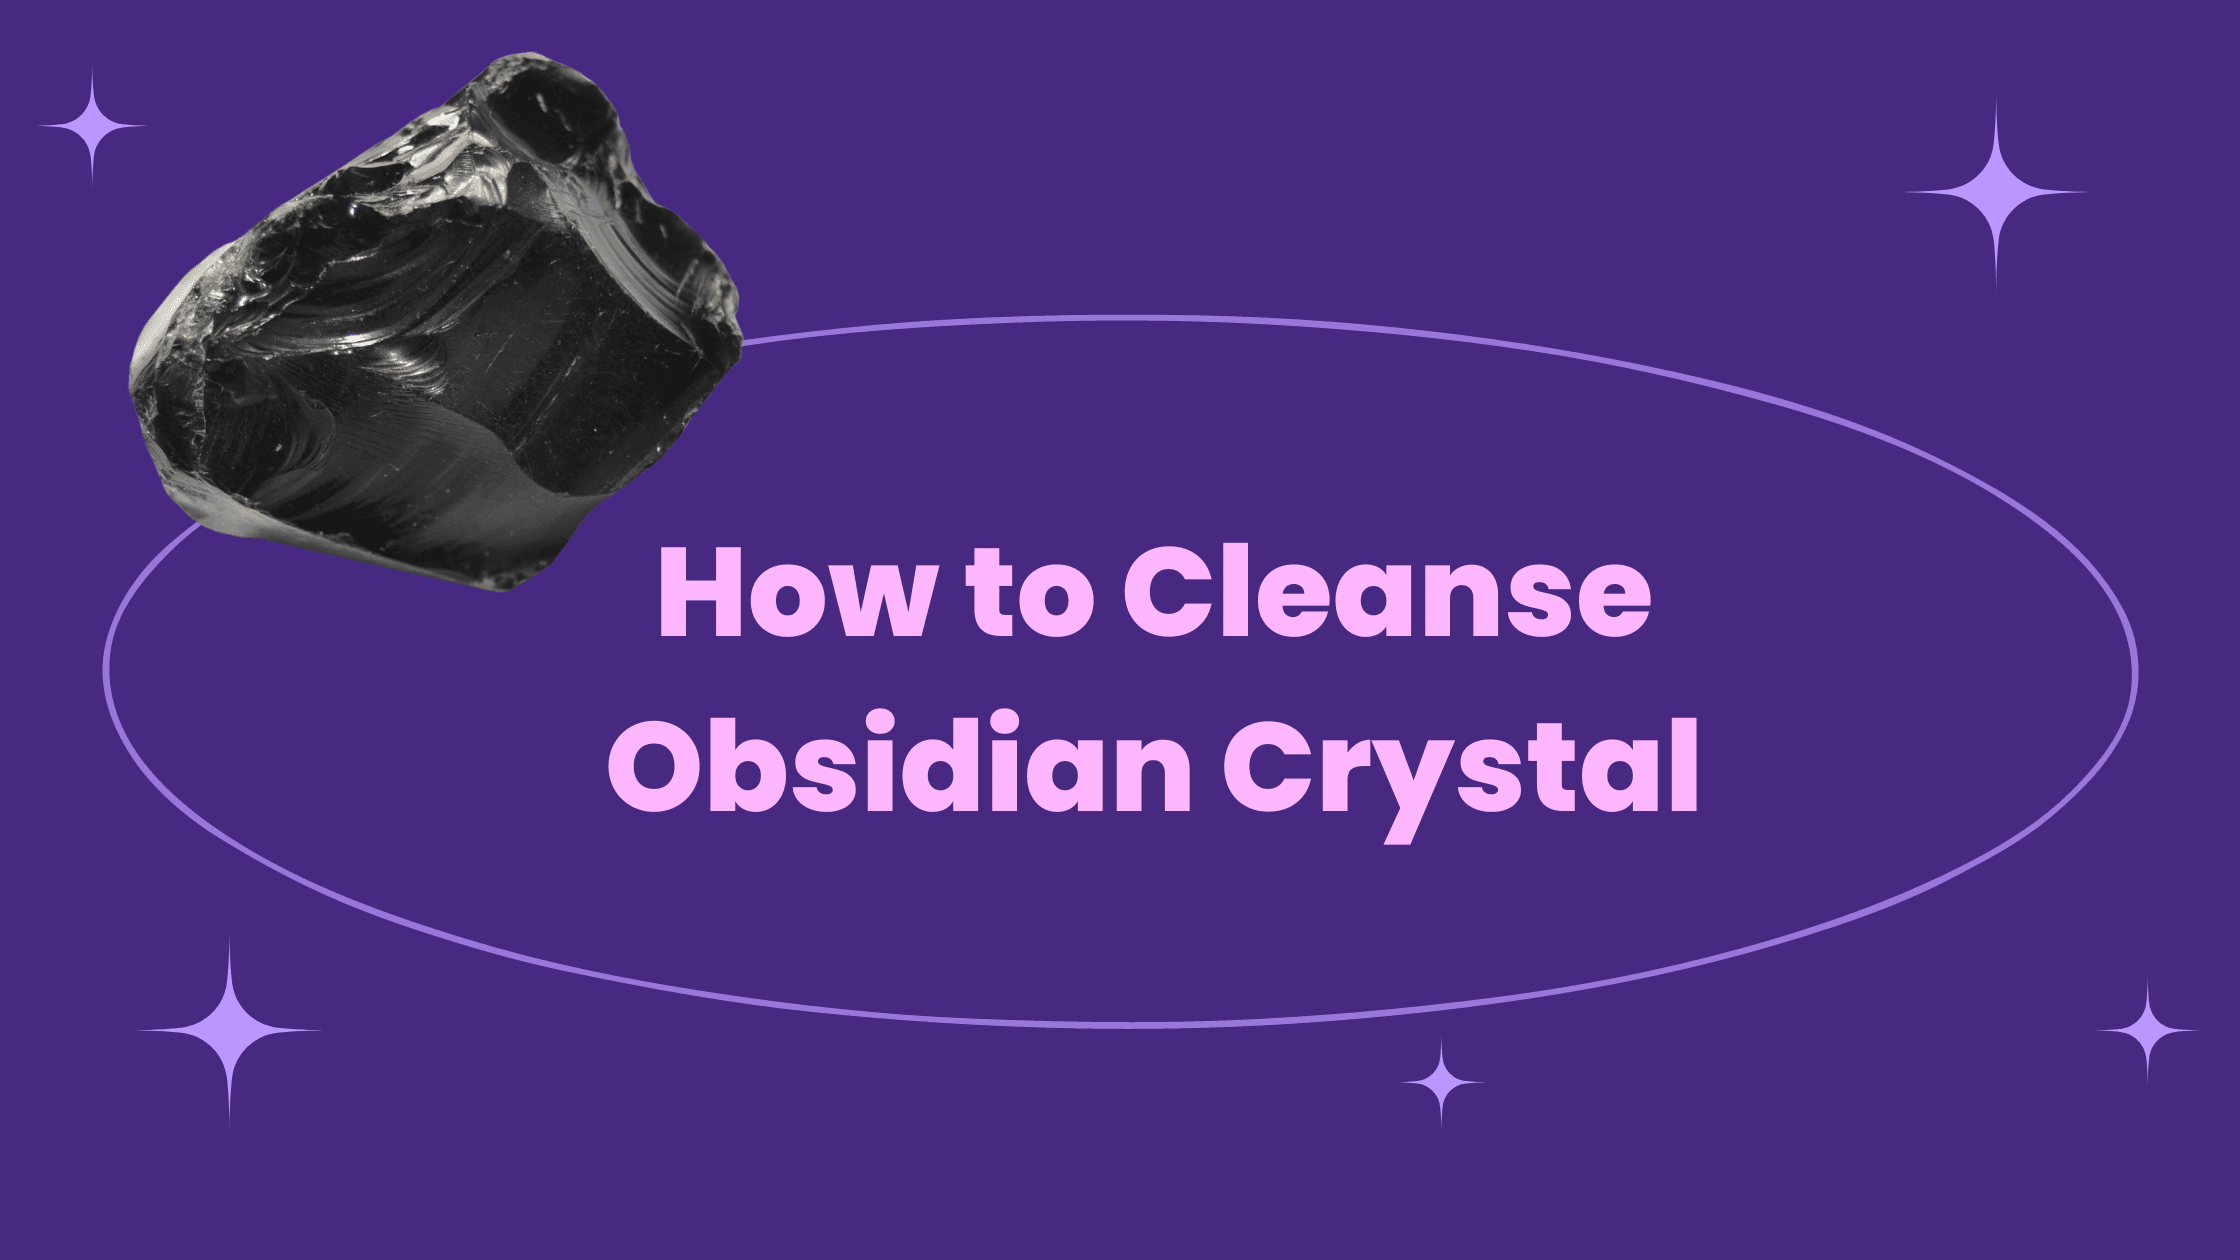 How to Cleanse Obsidian Crystal